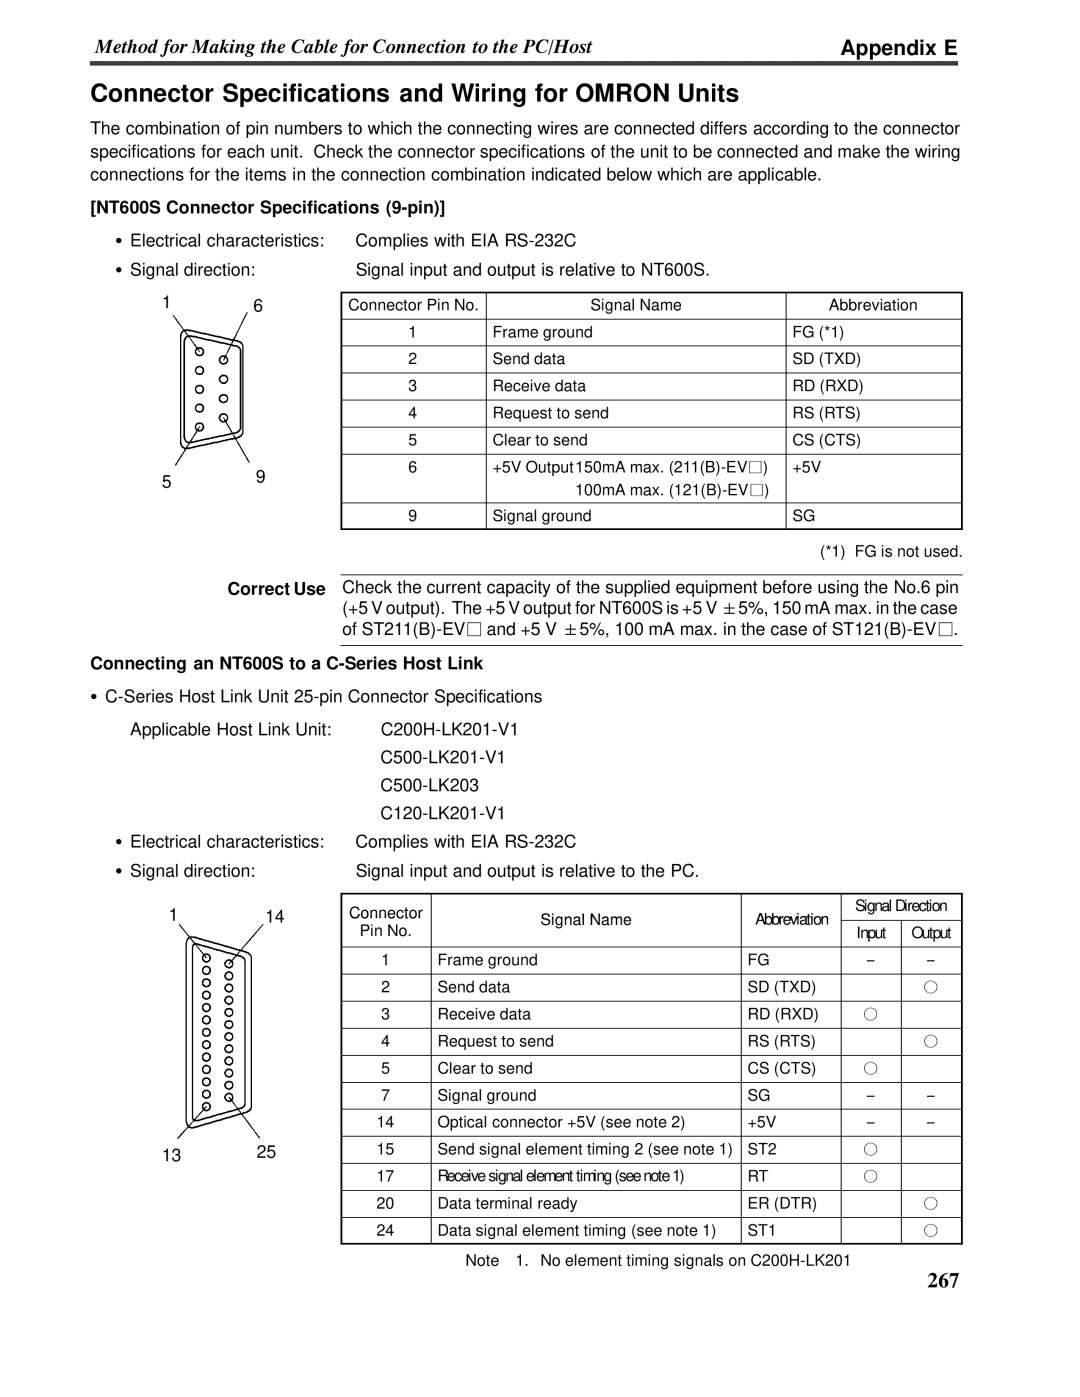 Omron V022-E3-1 Appendix E, NT600S Connector Specifications 9-pin, Correct Use, an NT600S to a C-SeriesHost Link 